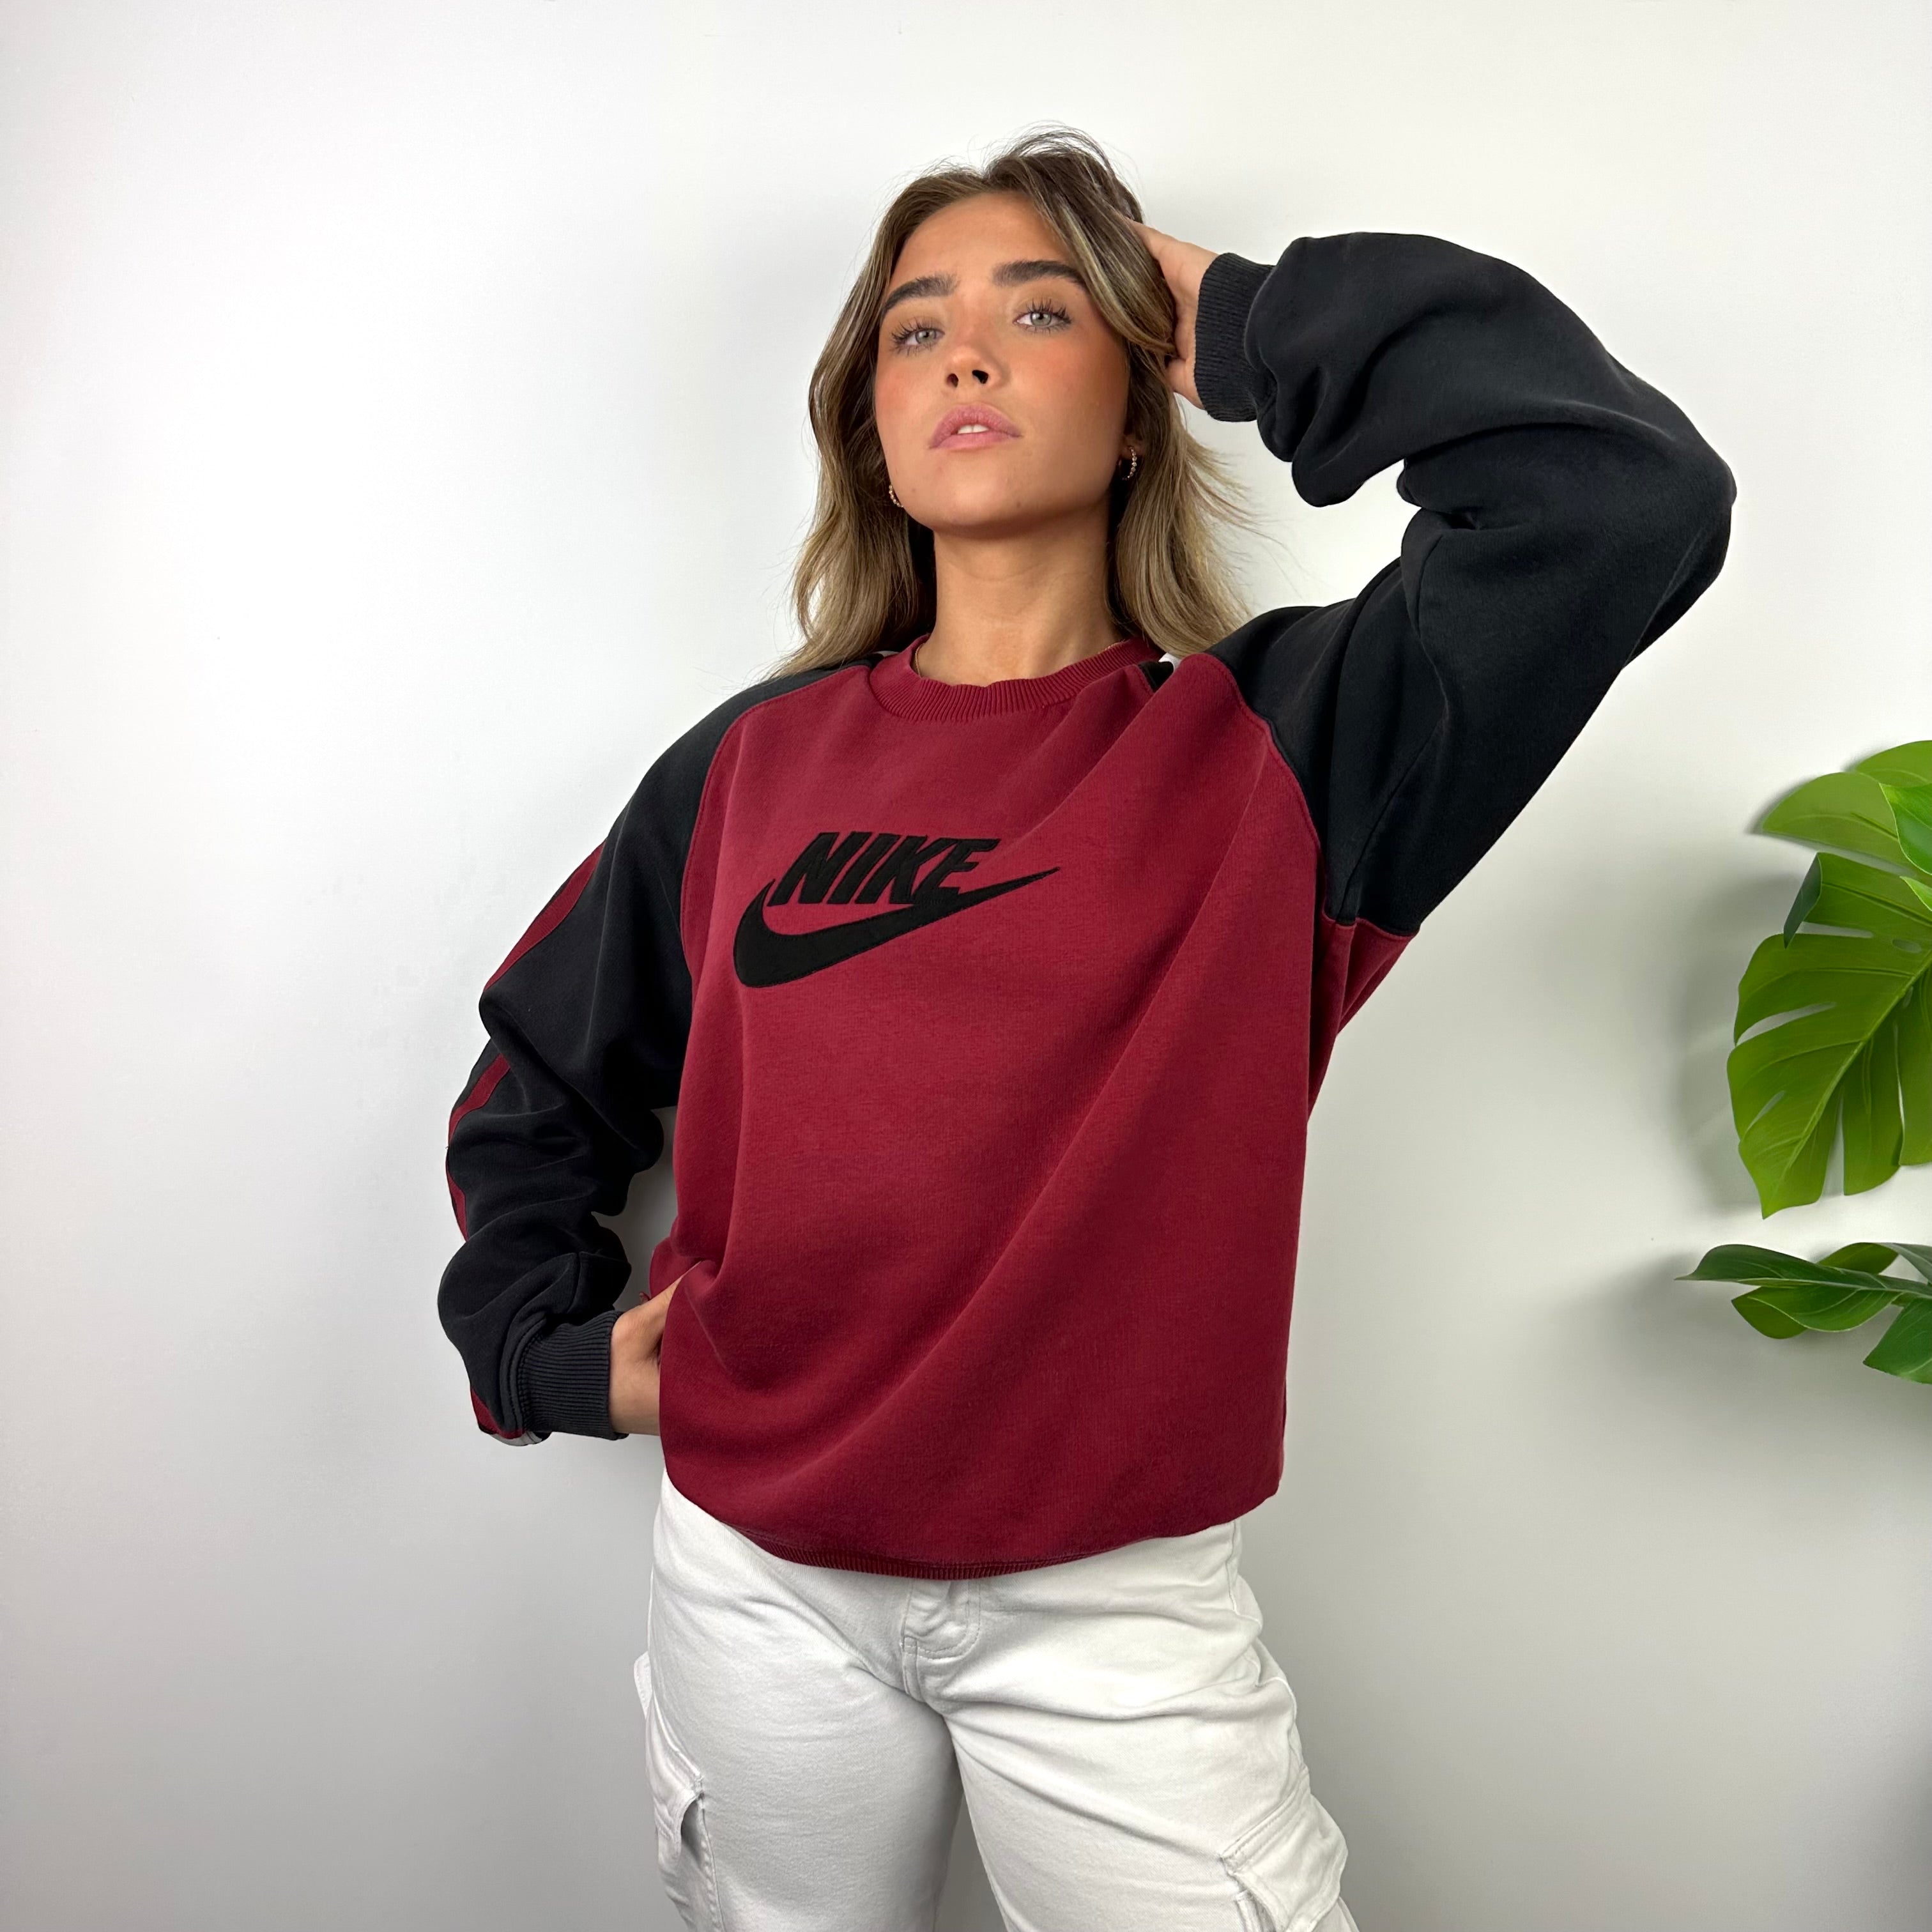 Nike Red Embroidered Spell Out Sweatshirt (M)